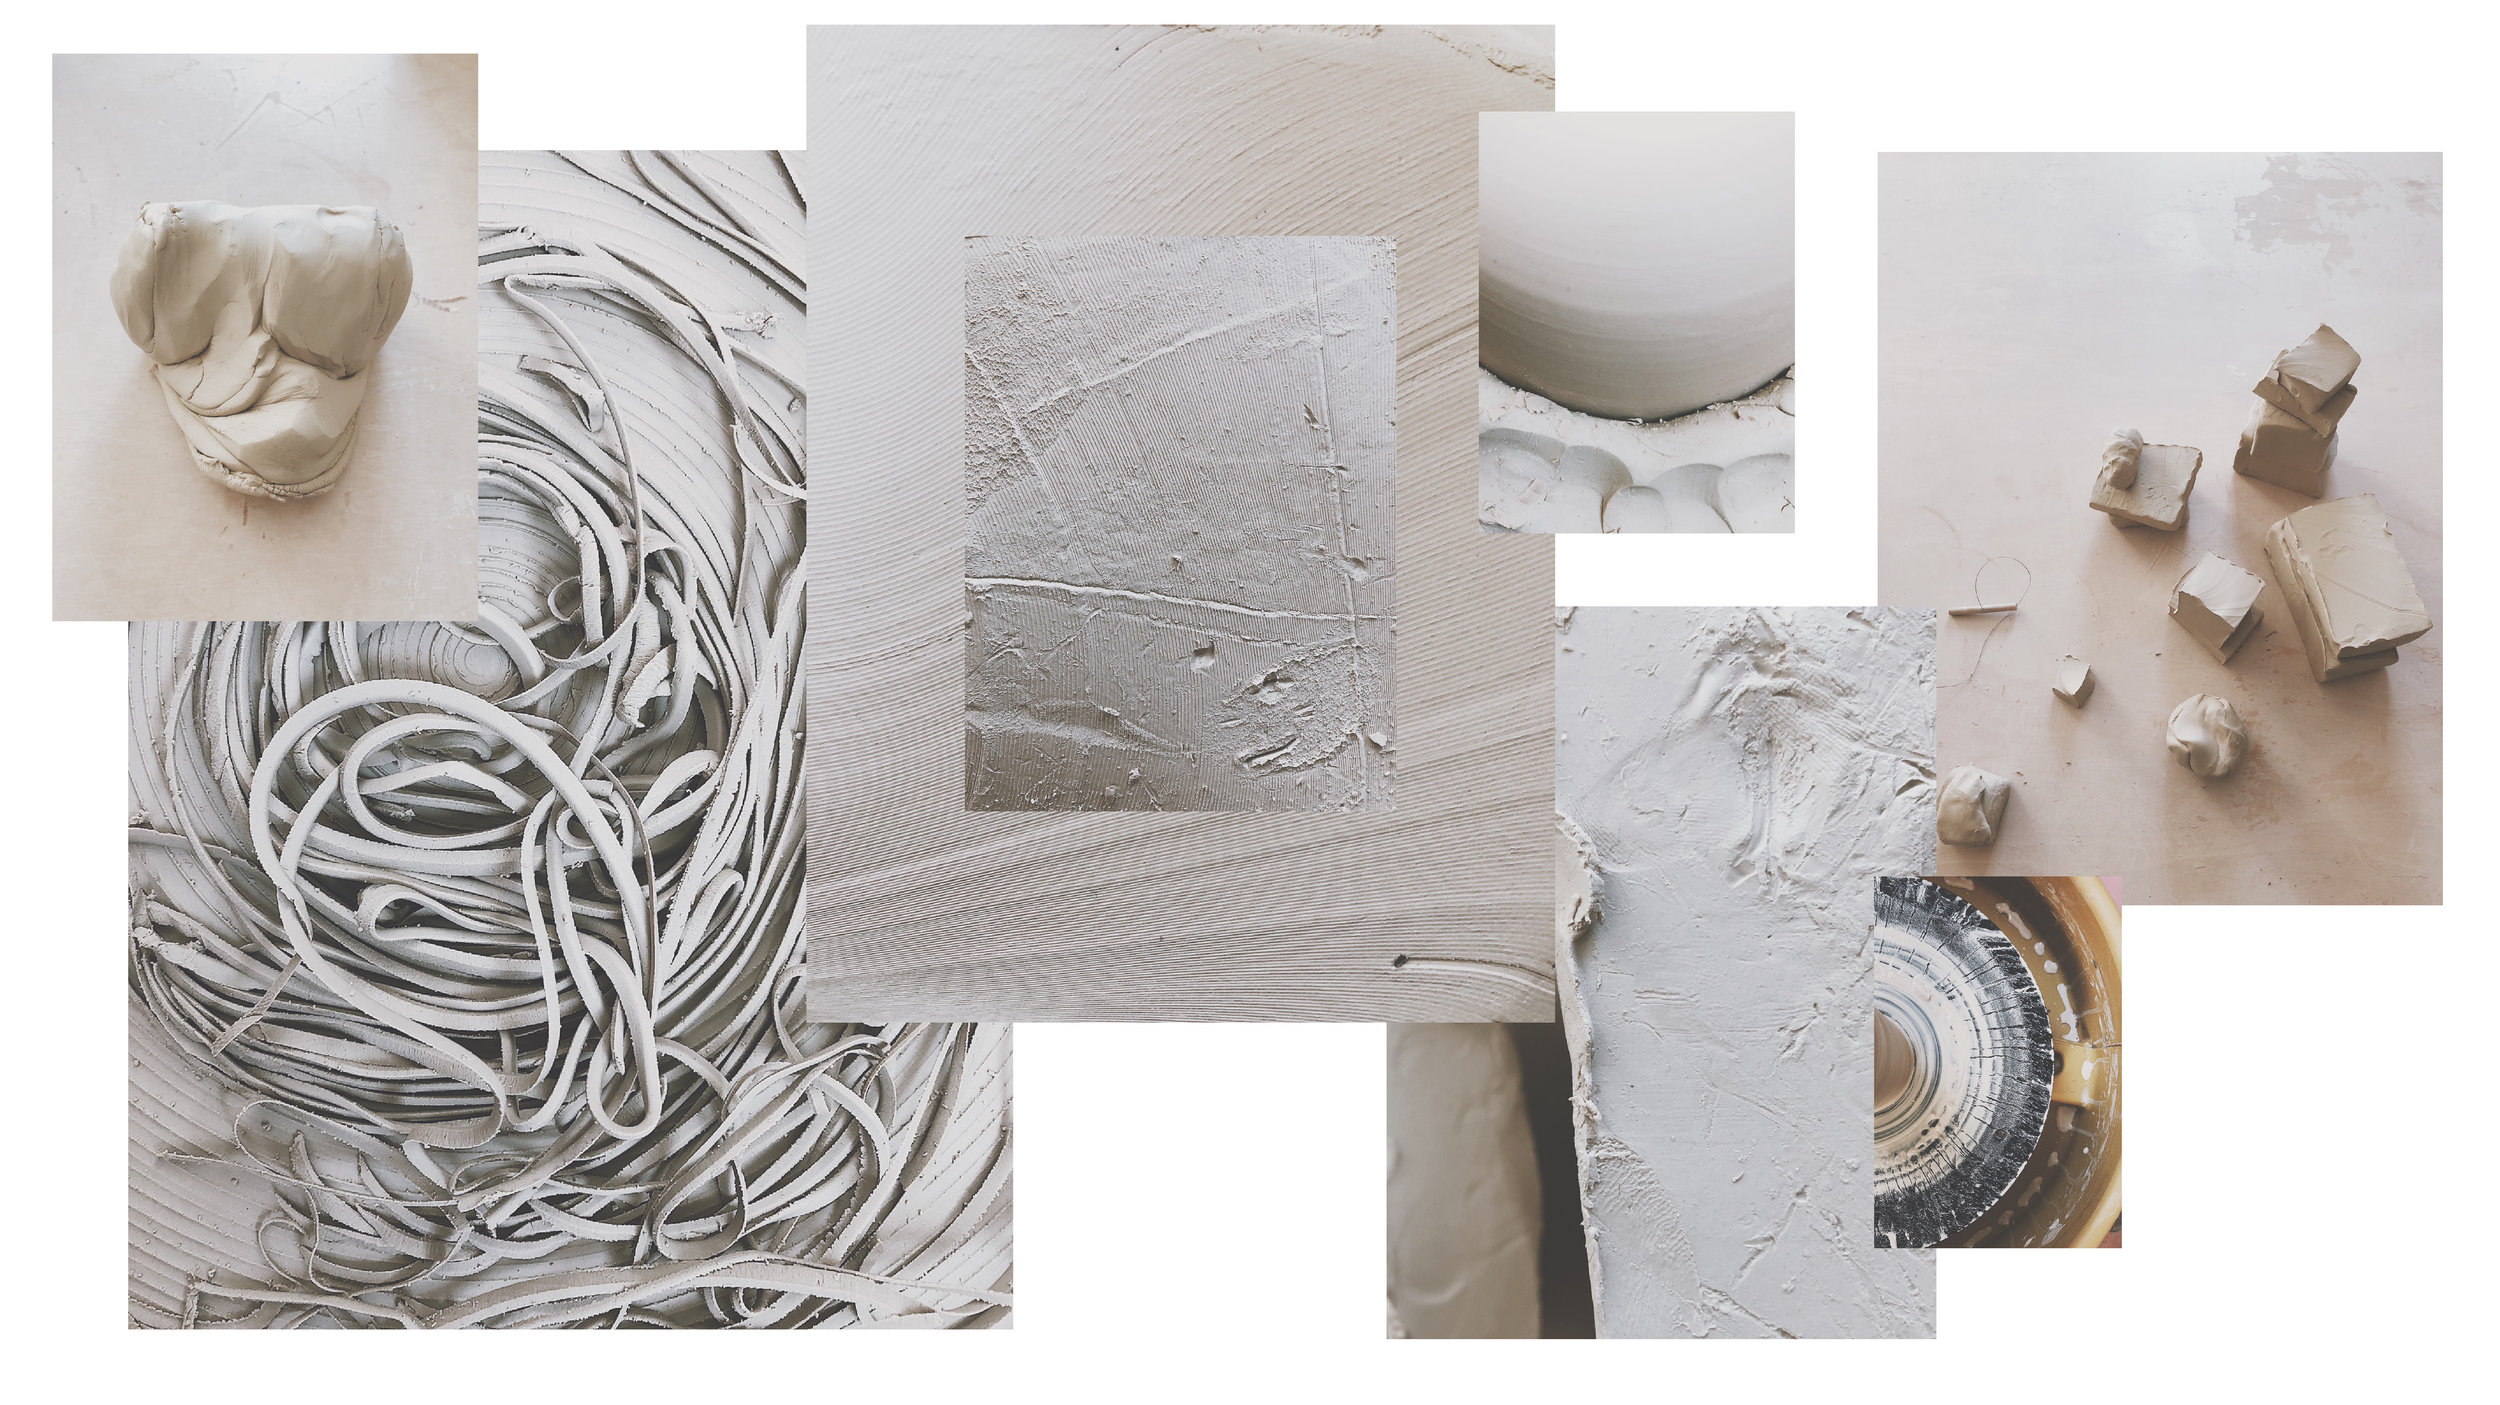  Original artwork created to reflect the textures in the process of making small batch ceramics. 